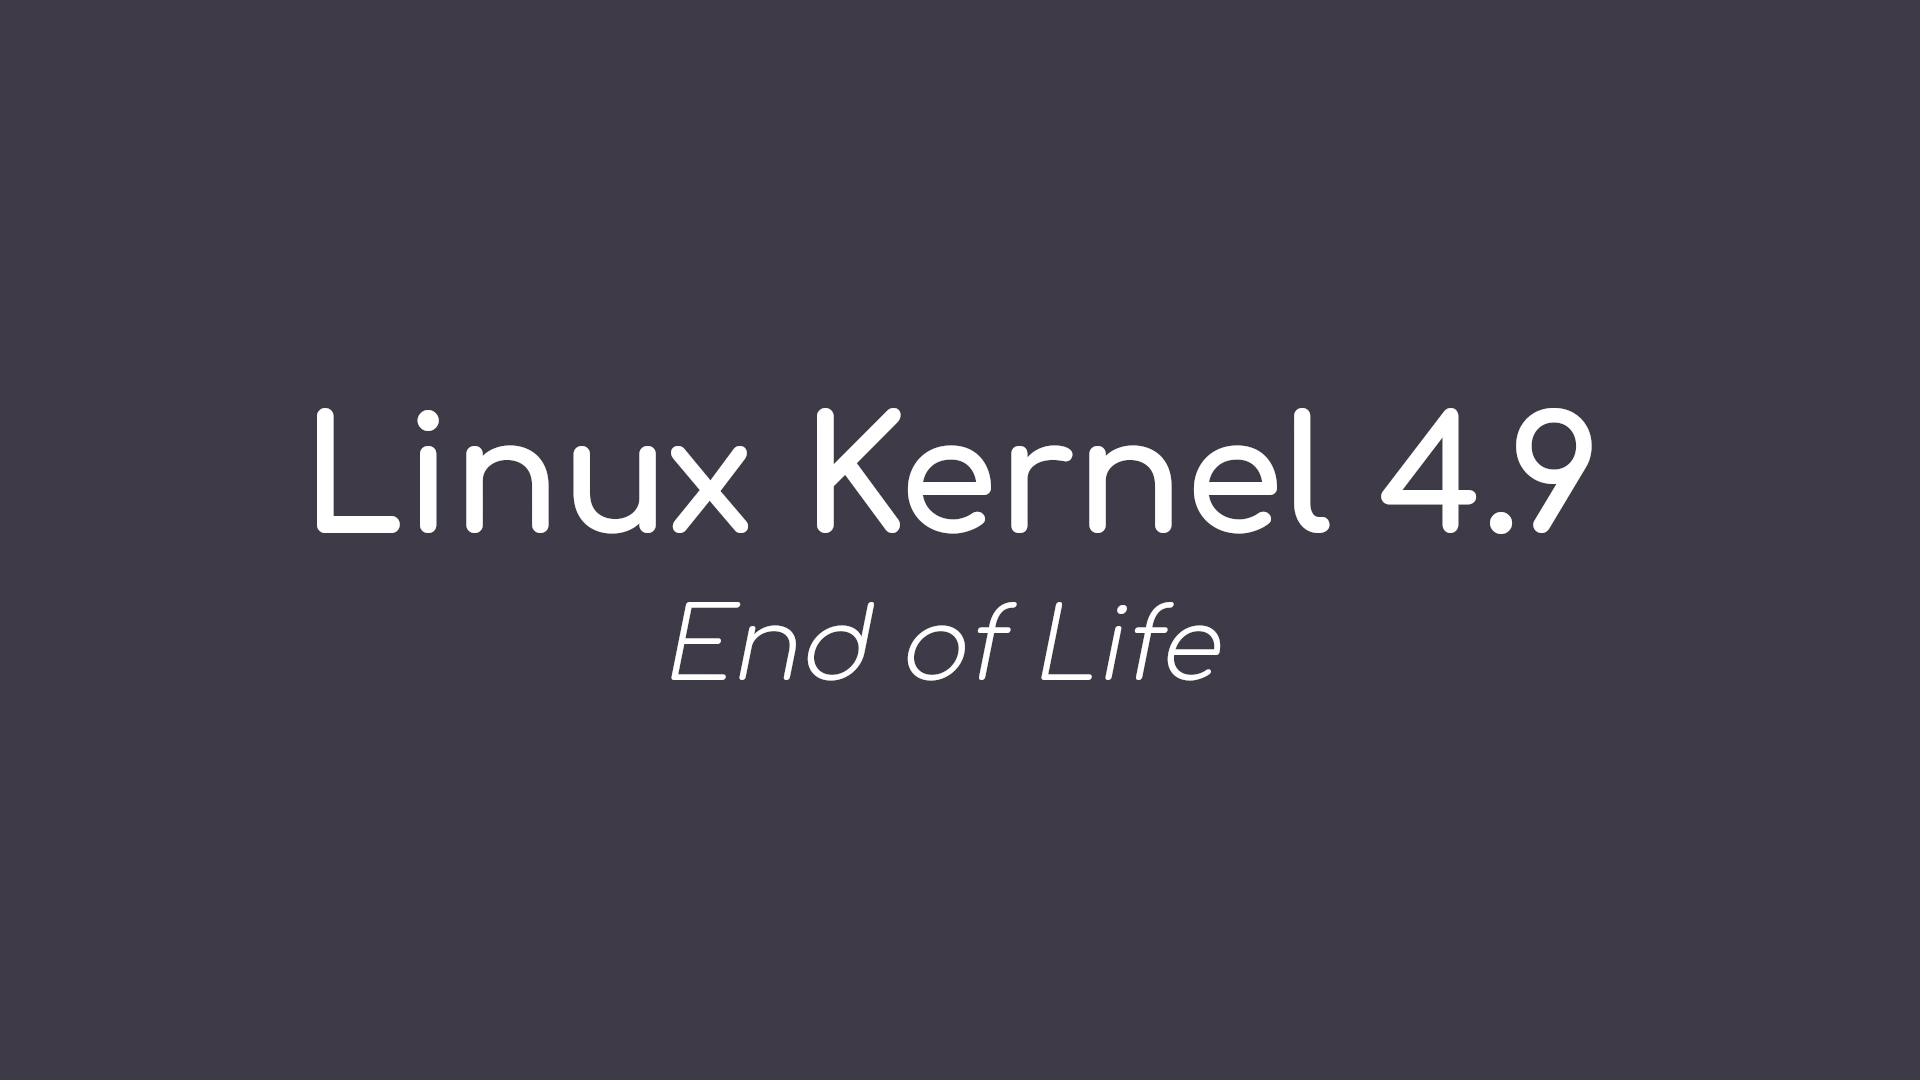 Linux Kernel 4.9 Reaches End of Life After 6 Years of Support